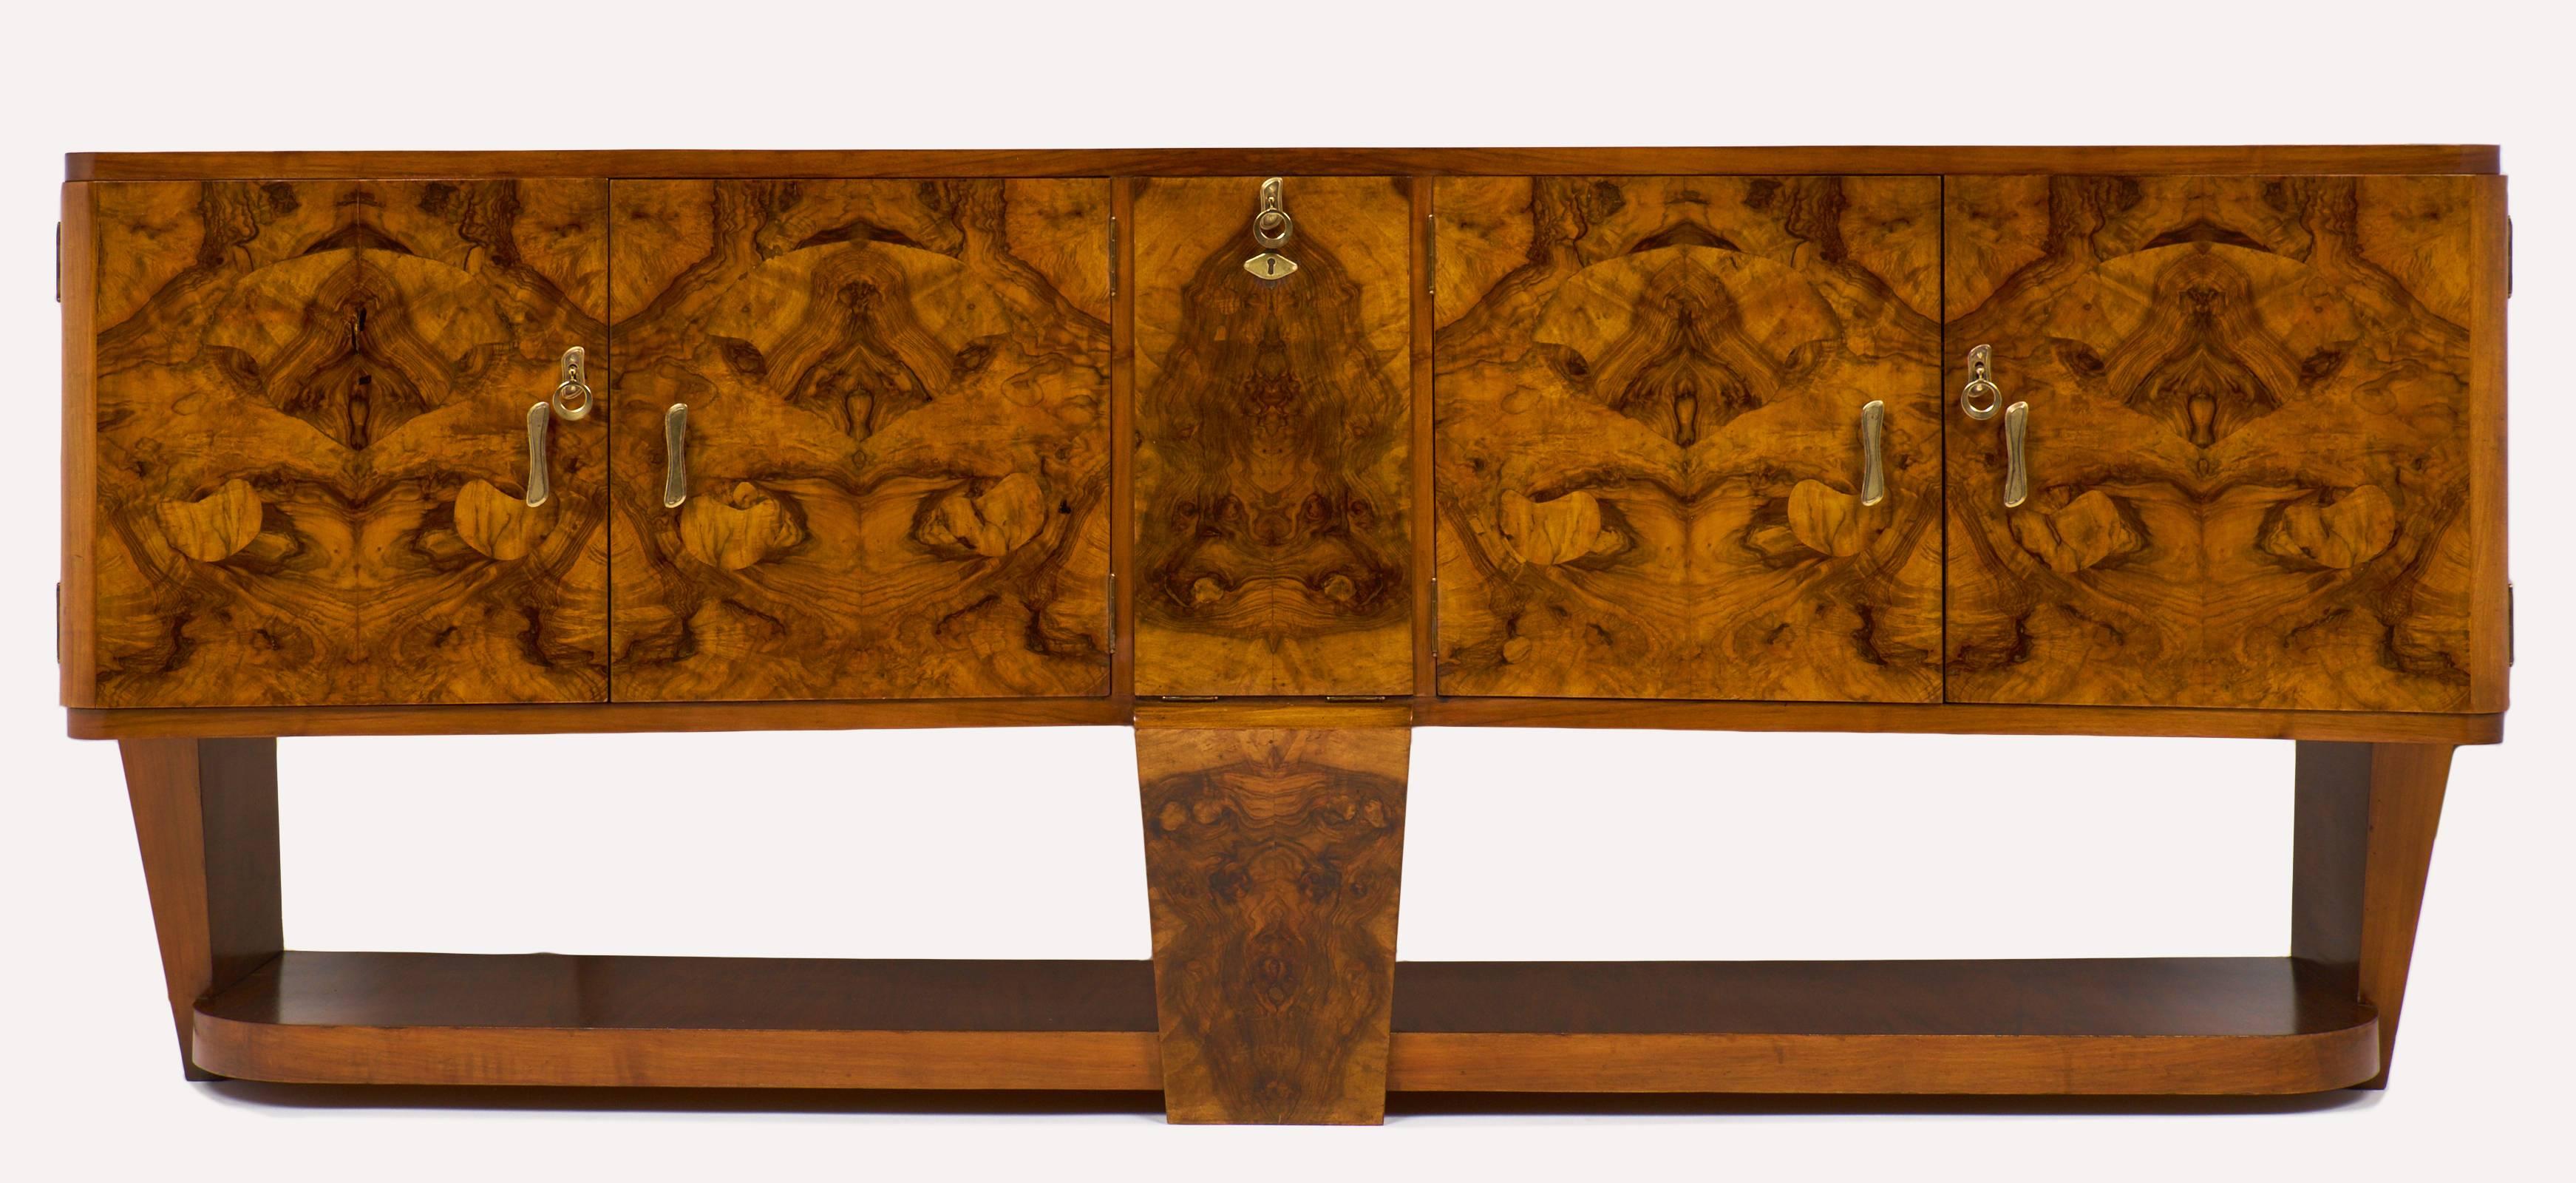 From Italy gorgeous burled walnut credenza/bar in the manner of Carlo di Carli.
We love the drop front bar compartment lined with mirror and of course the intricate figuring of the burled walnut. Solid brass hardware, French polish finish.